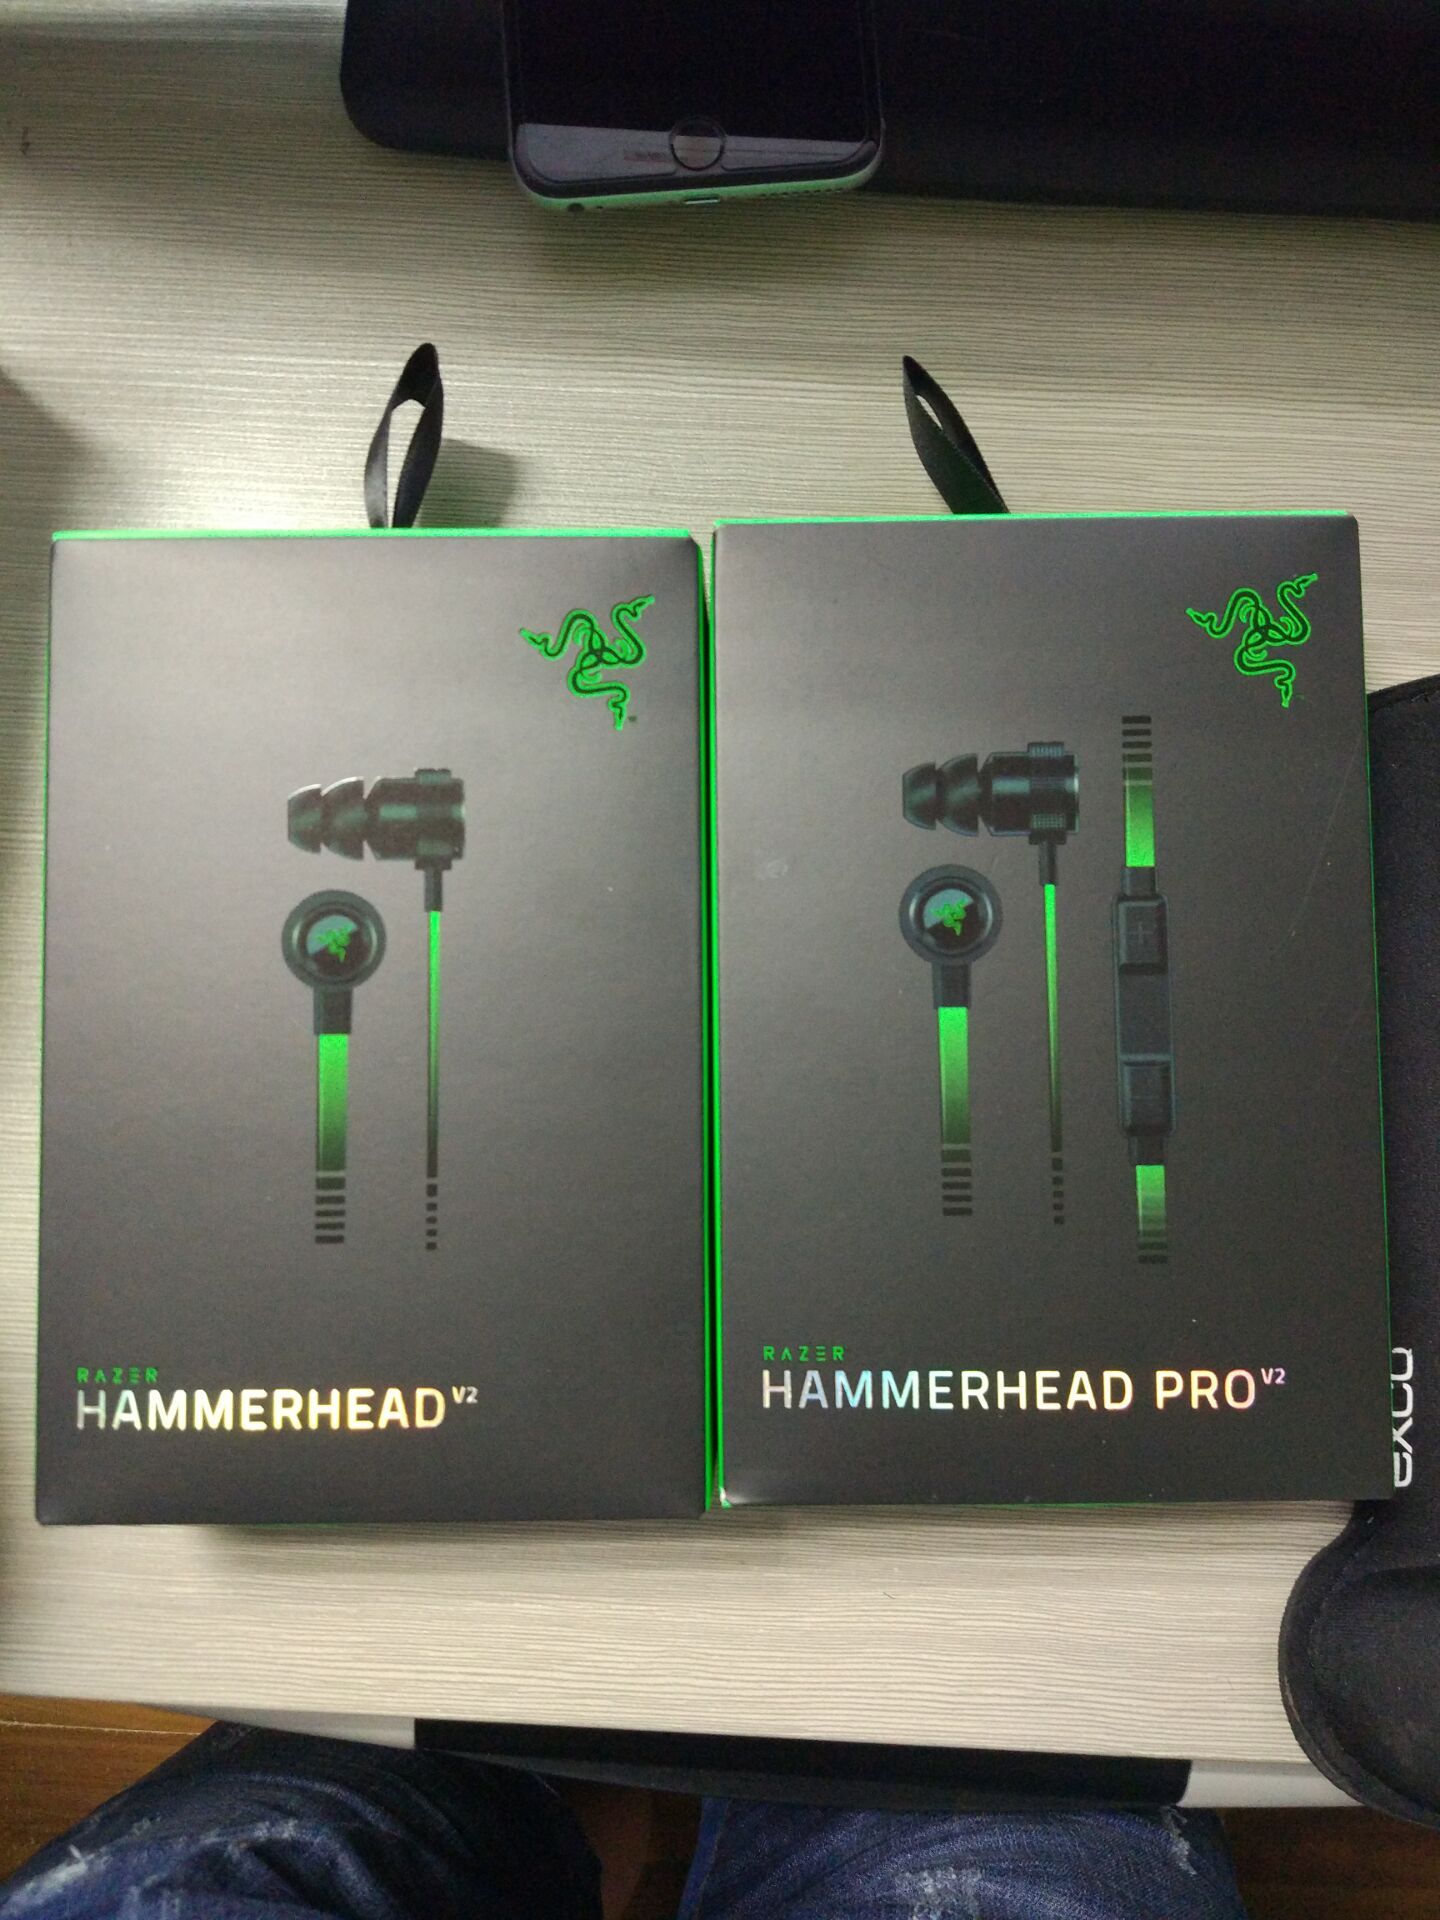 Razer Hammerhead Pro V2 Earphone With Microphone With Retail Box In Ear Gaming Headsets Noise Isolation Stereo Bass 3 5mm Fast Dhl From Bluesky99 17 09 Dhgate Com